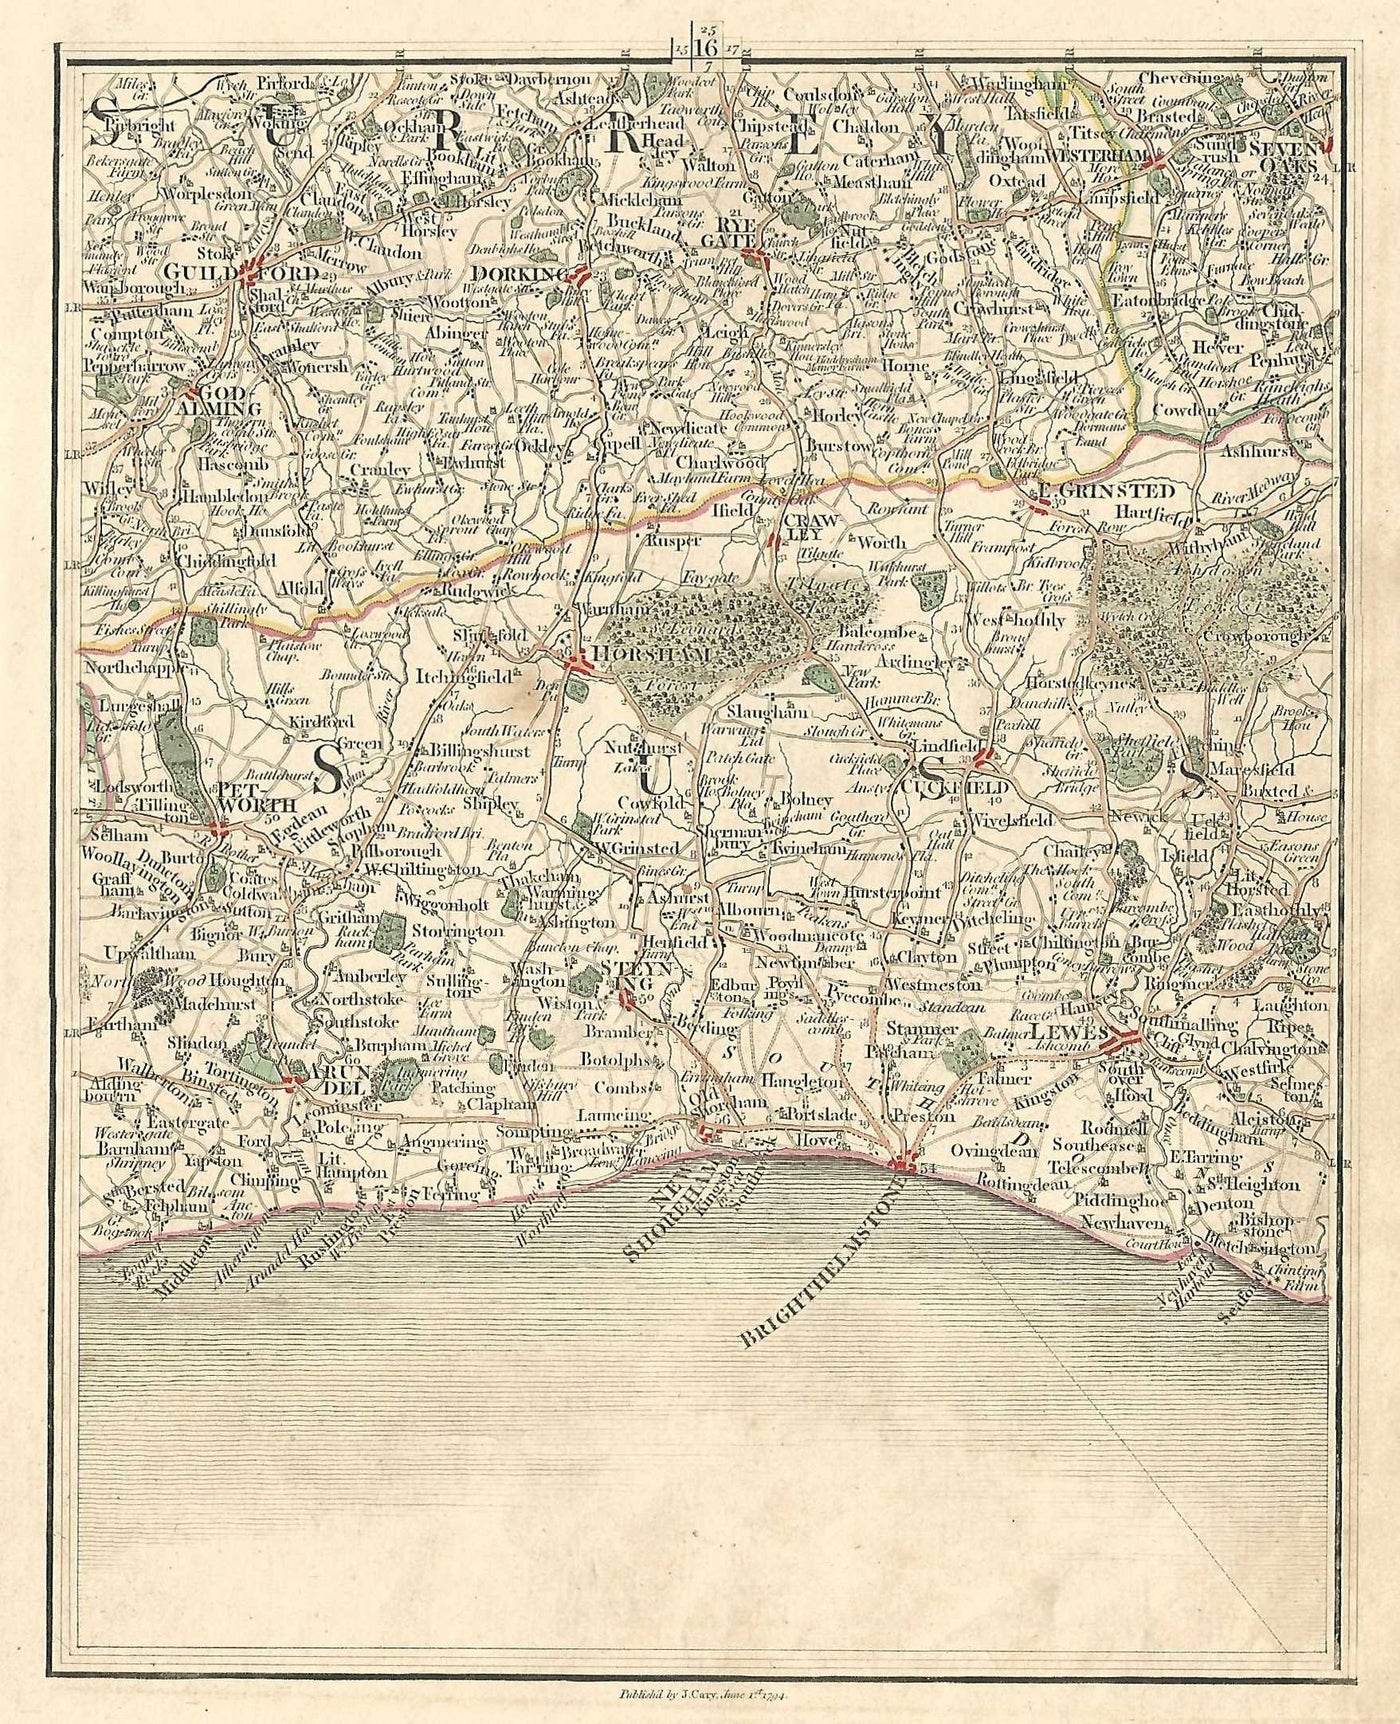 Sussex Surrey Georgian antique map published 1794 by John Cary